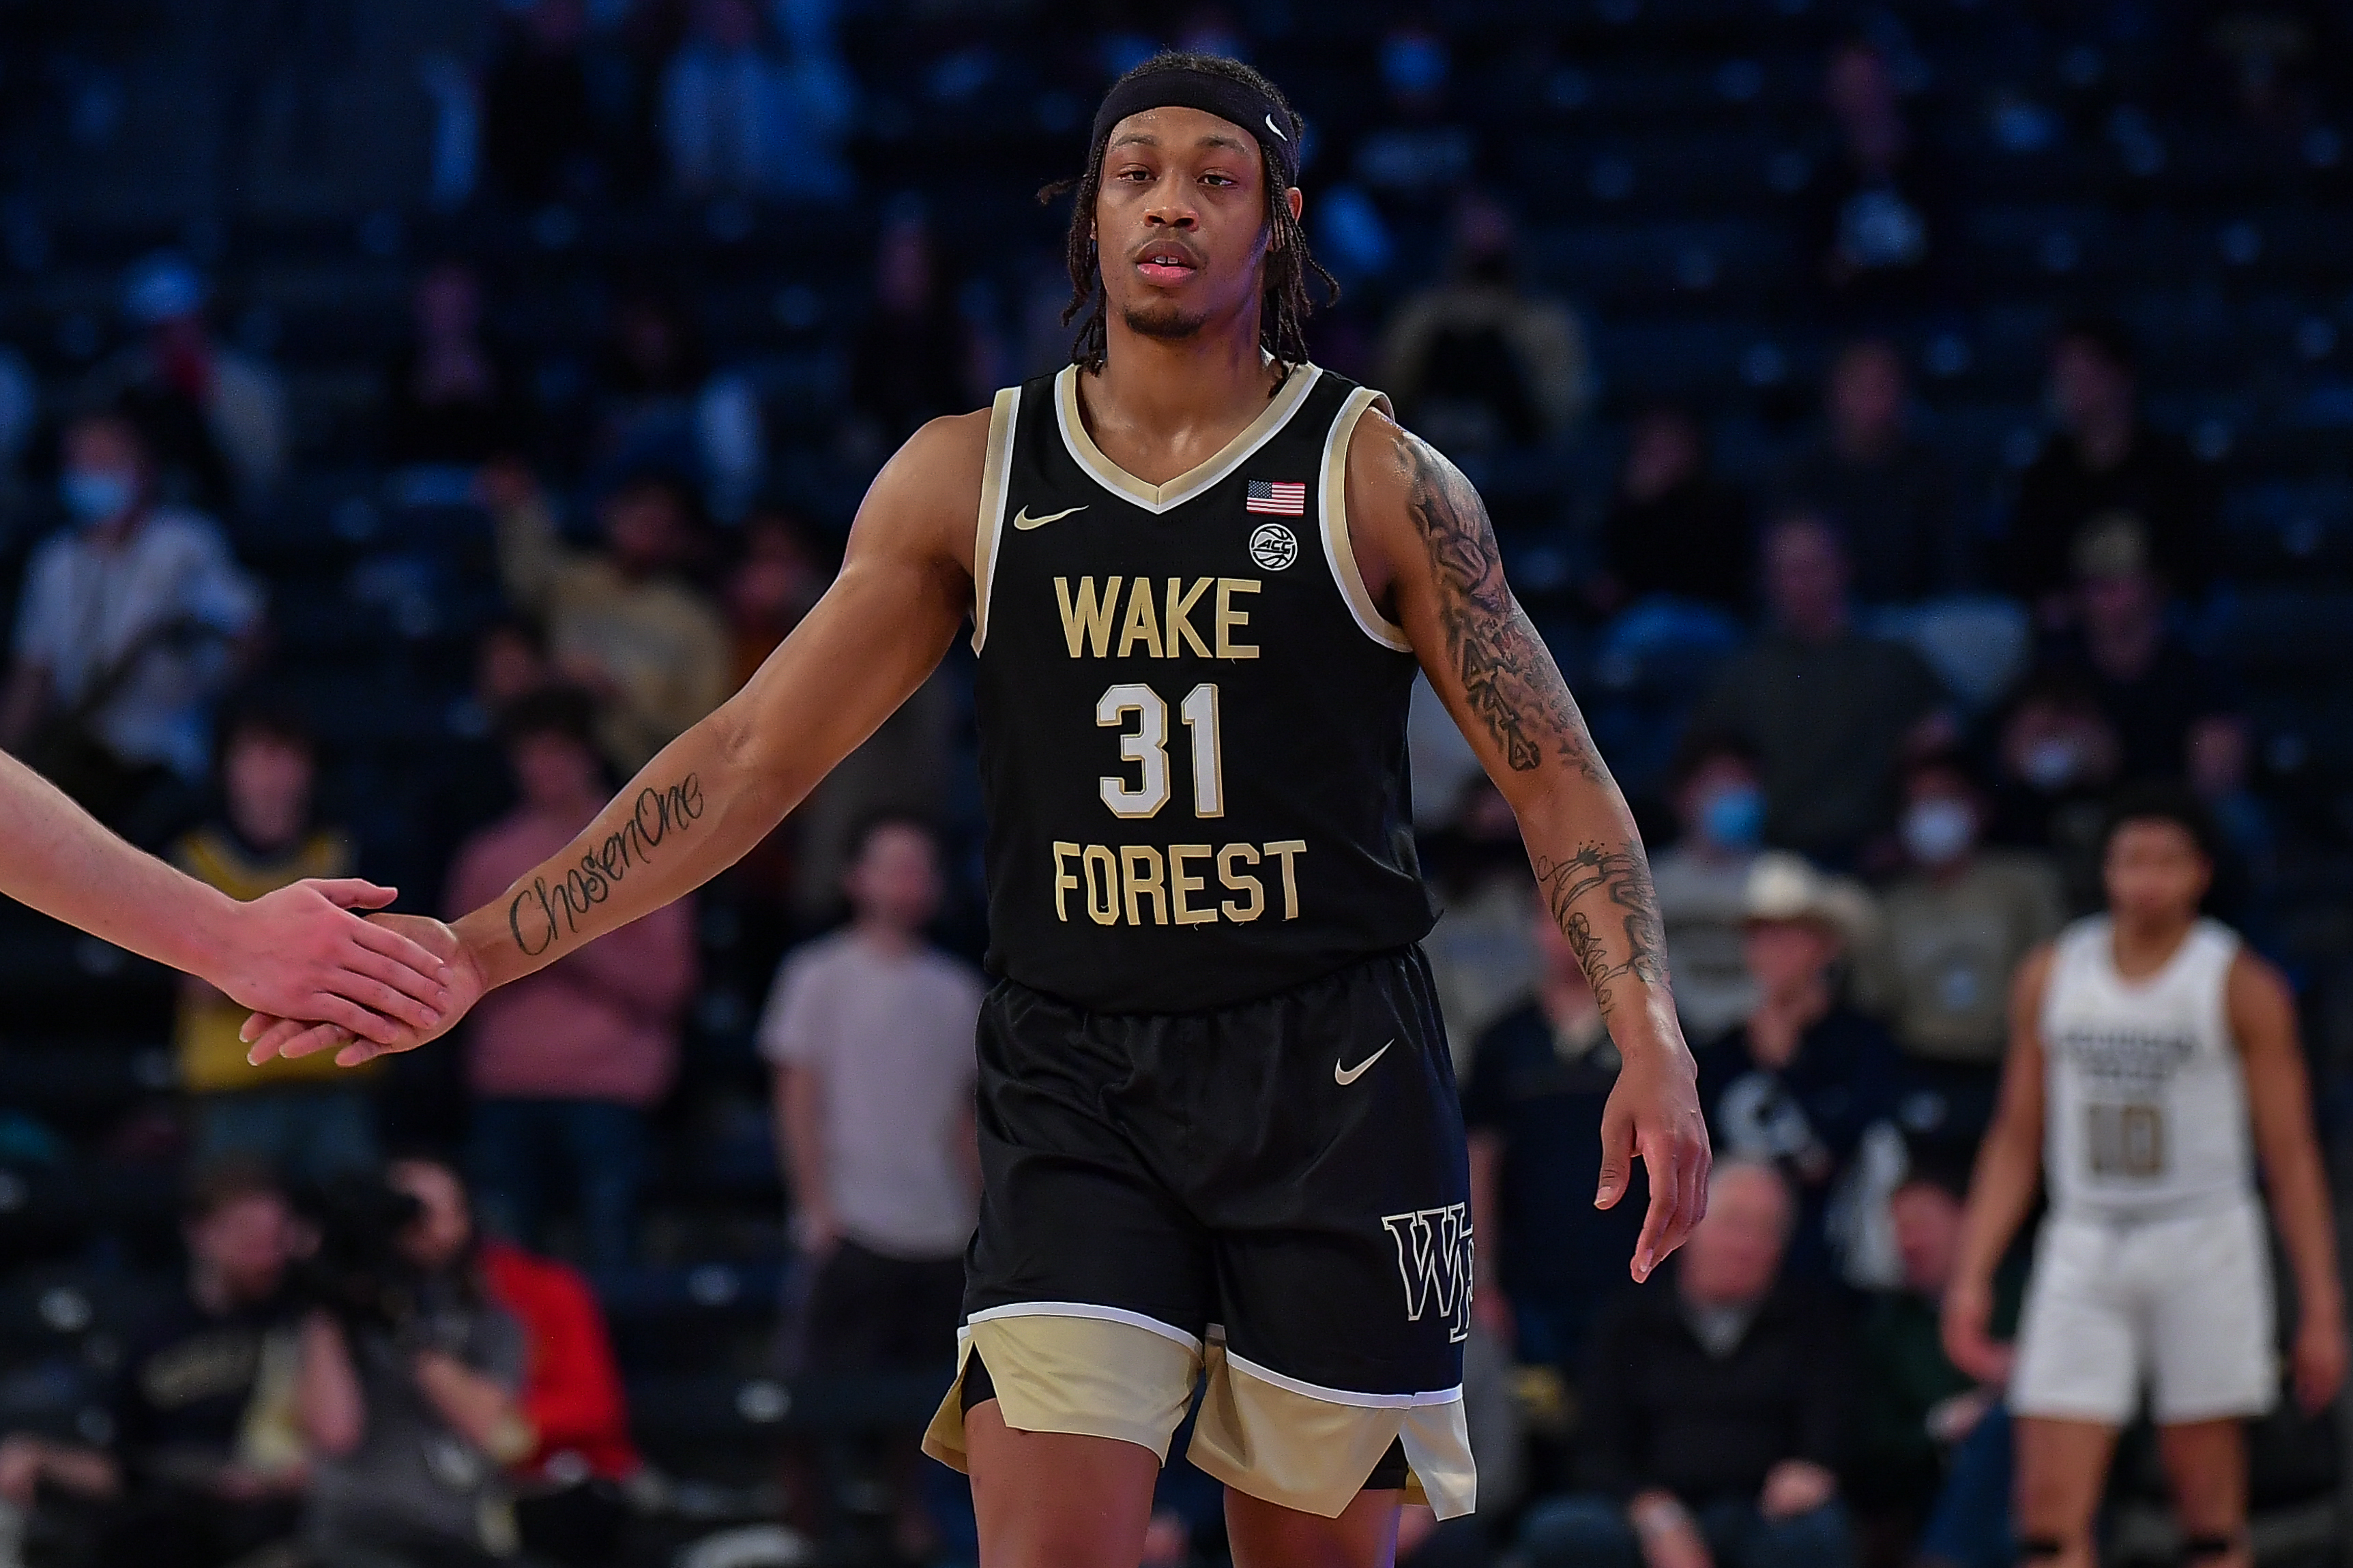 COLLEGE BASKETBALL: JAN 19 Wake Forest at Georgia Tech